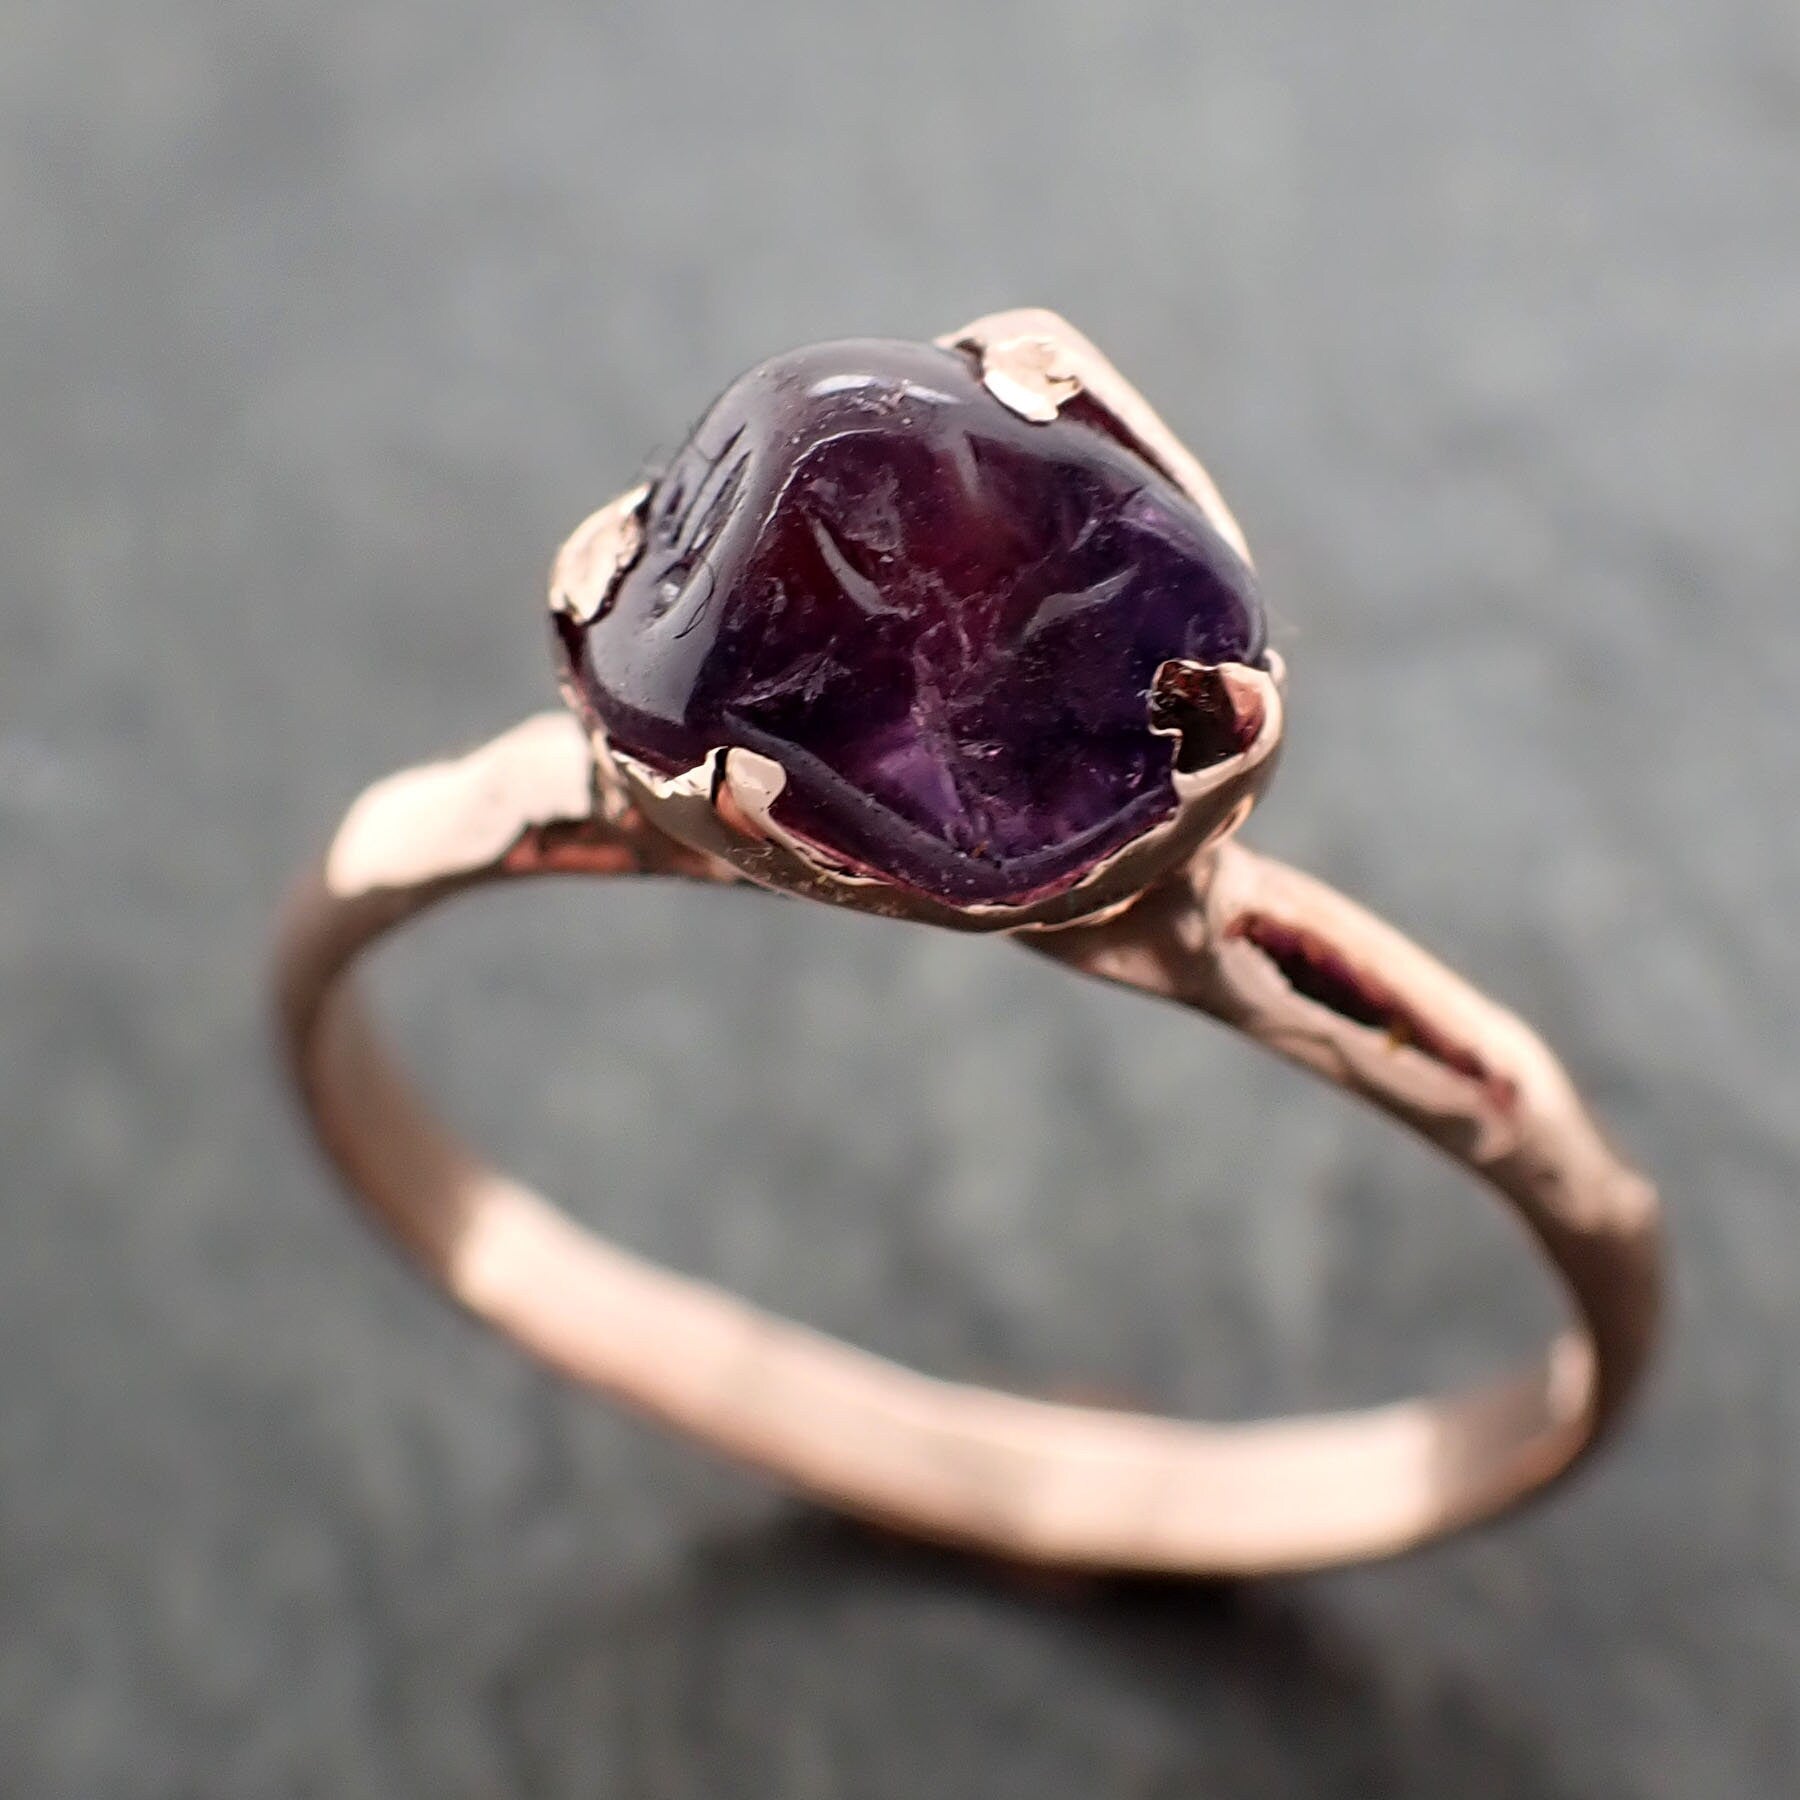 Sapphire Pebble Purple polished 14k Rose gold Solitaire gemstone ring 2897